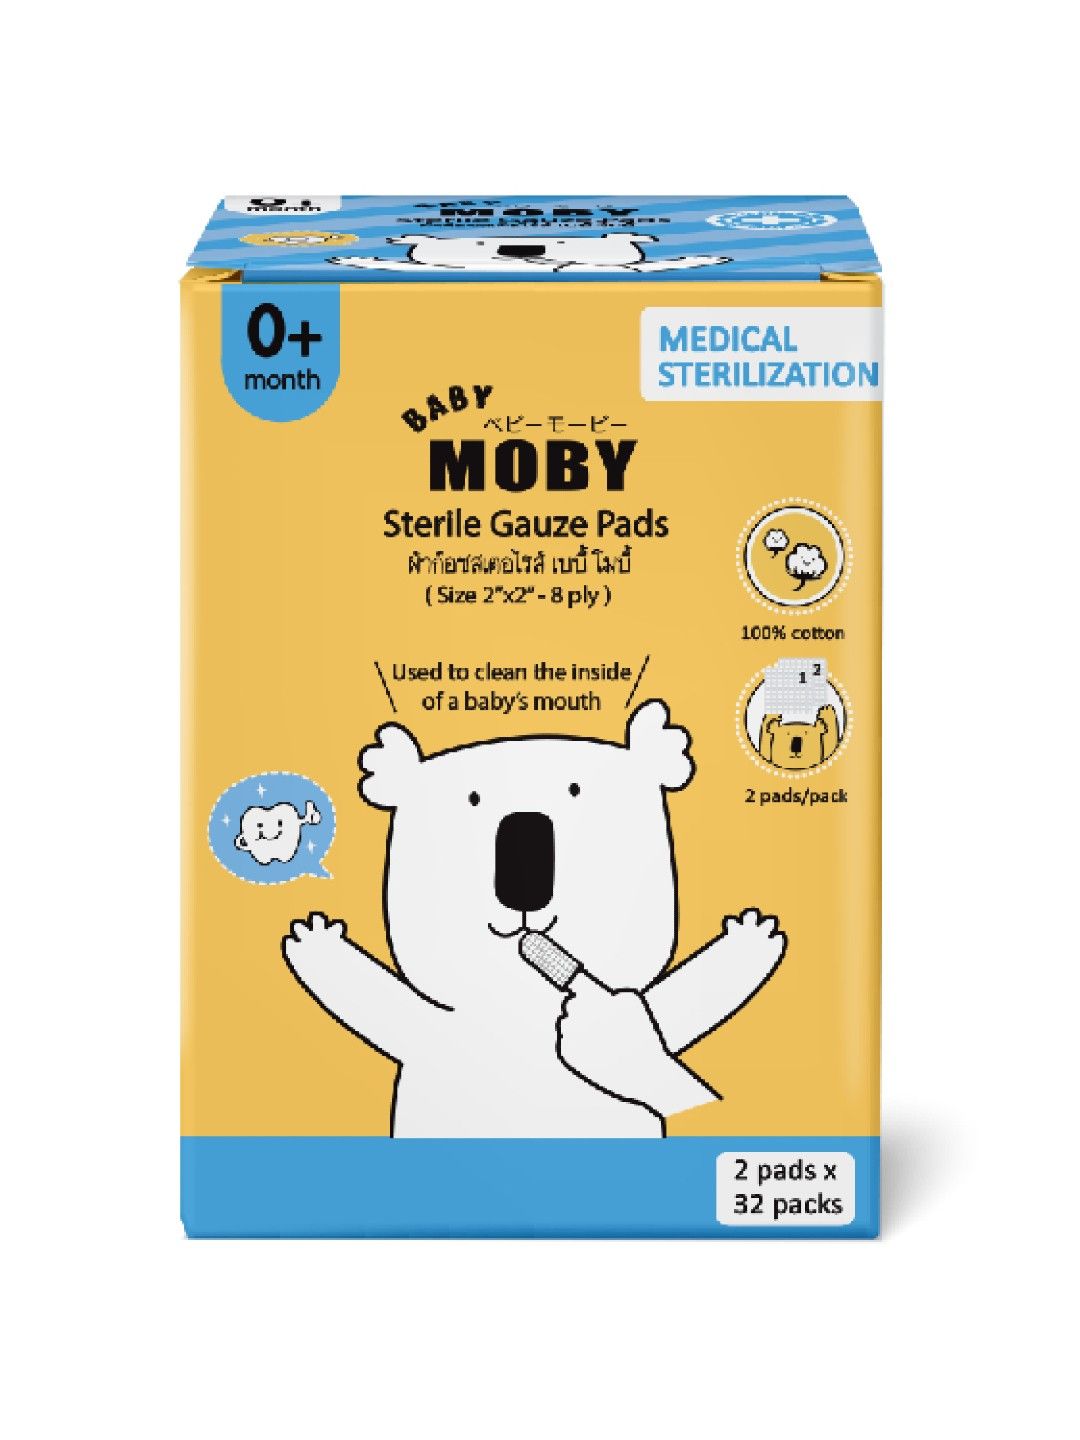 Baby Moby Sterile Gauze Pads (2 pads x 32 sterile packs)